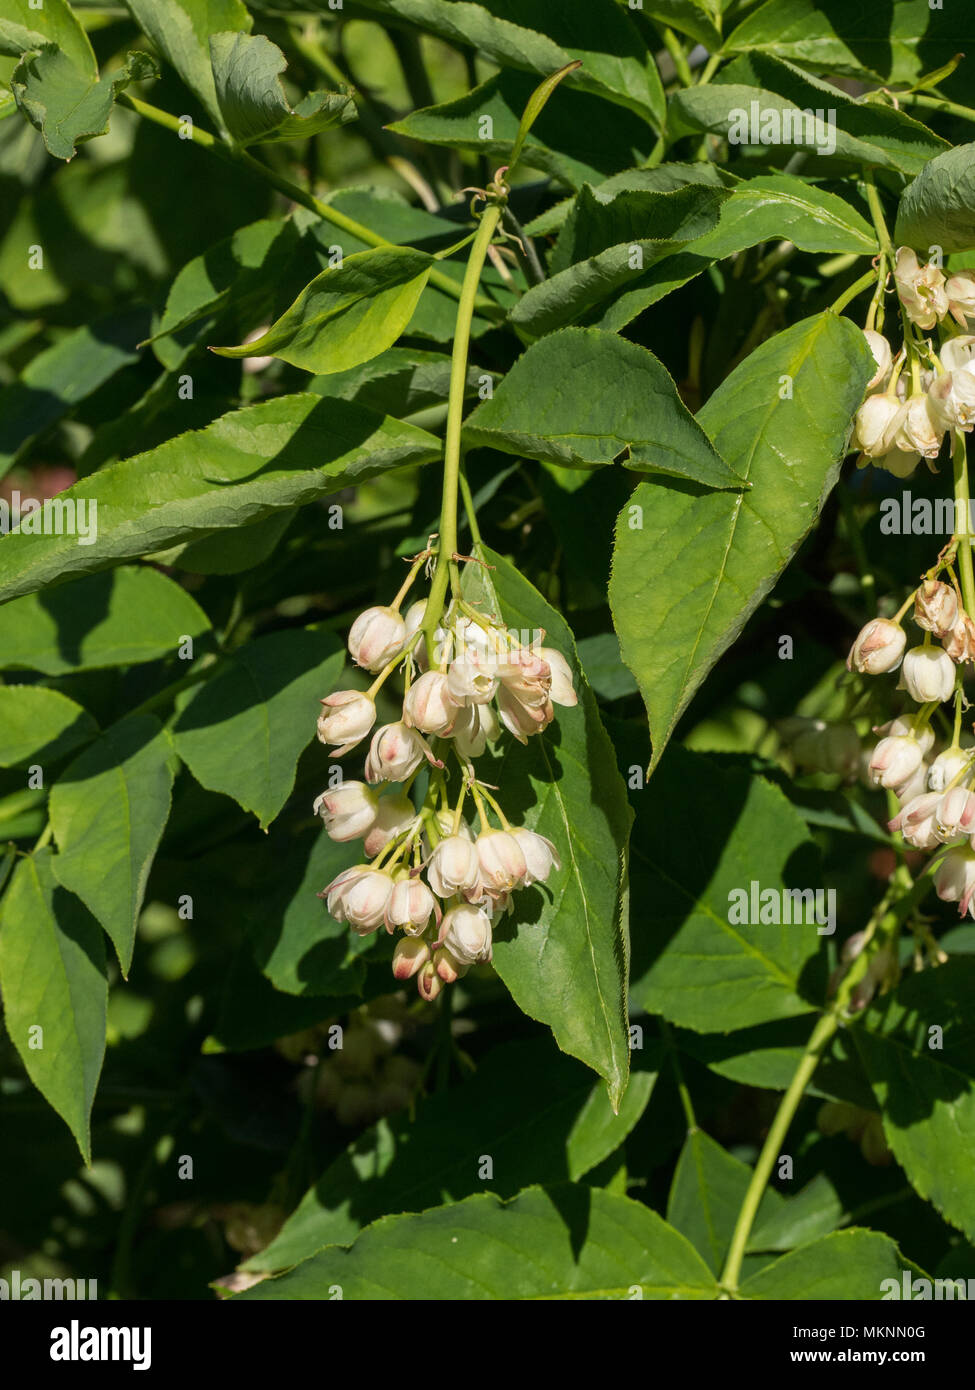 The drooping white flower heads of Staphylea holocarpa Stock Photo